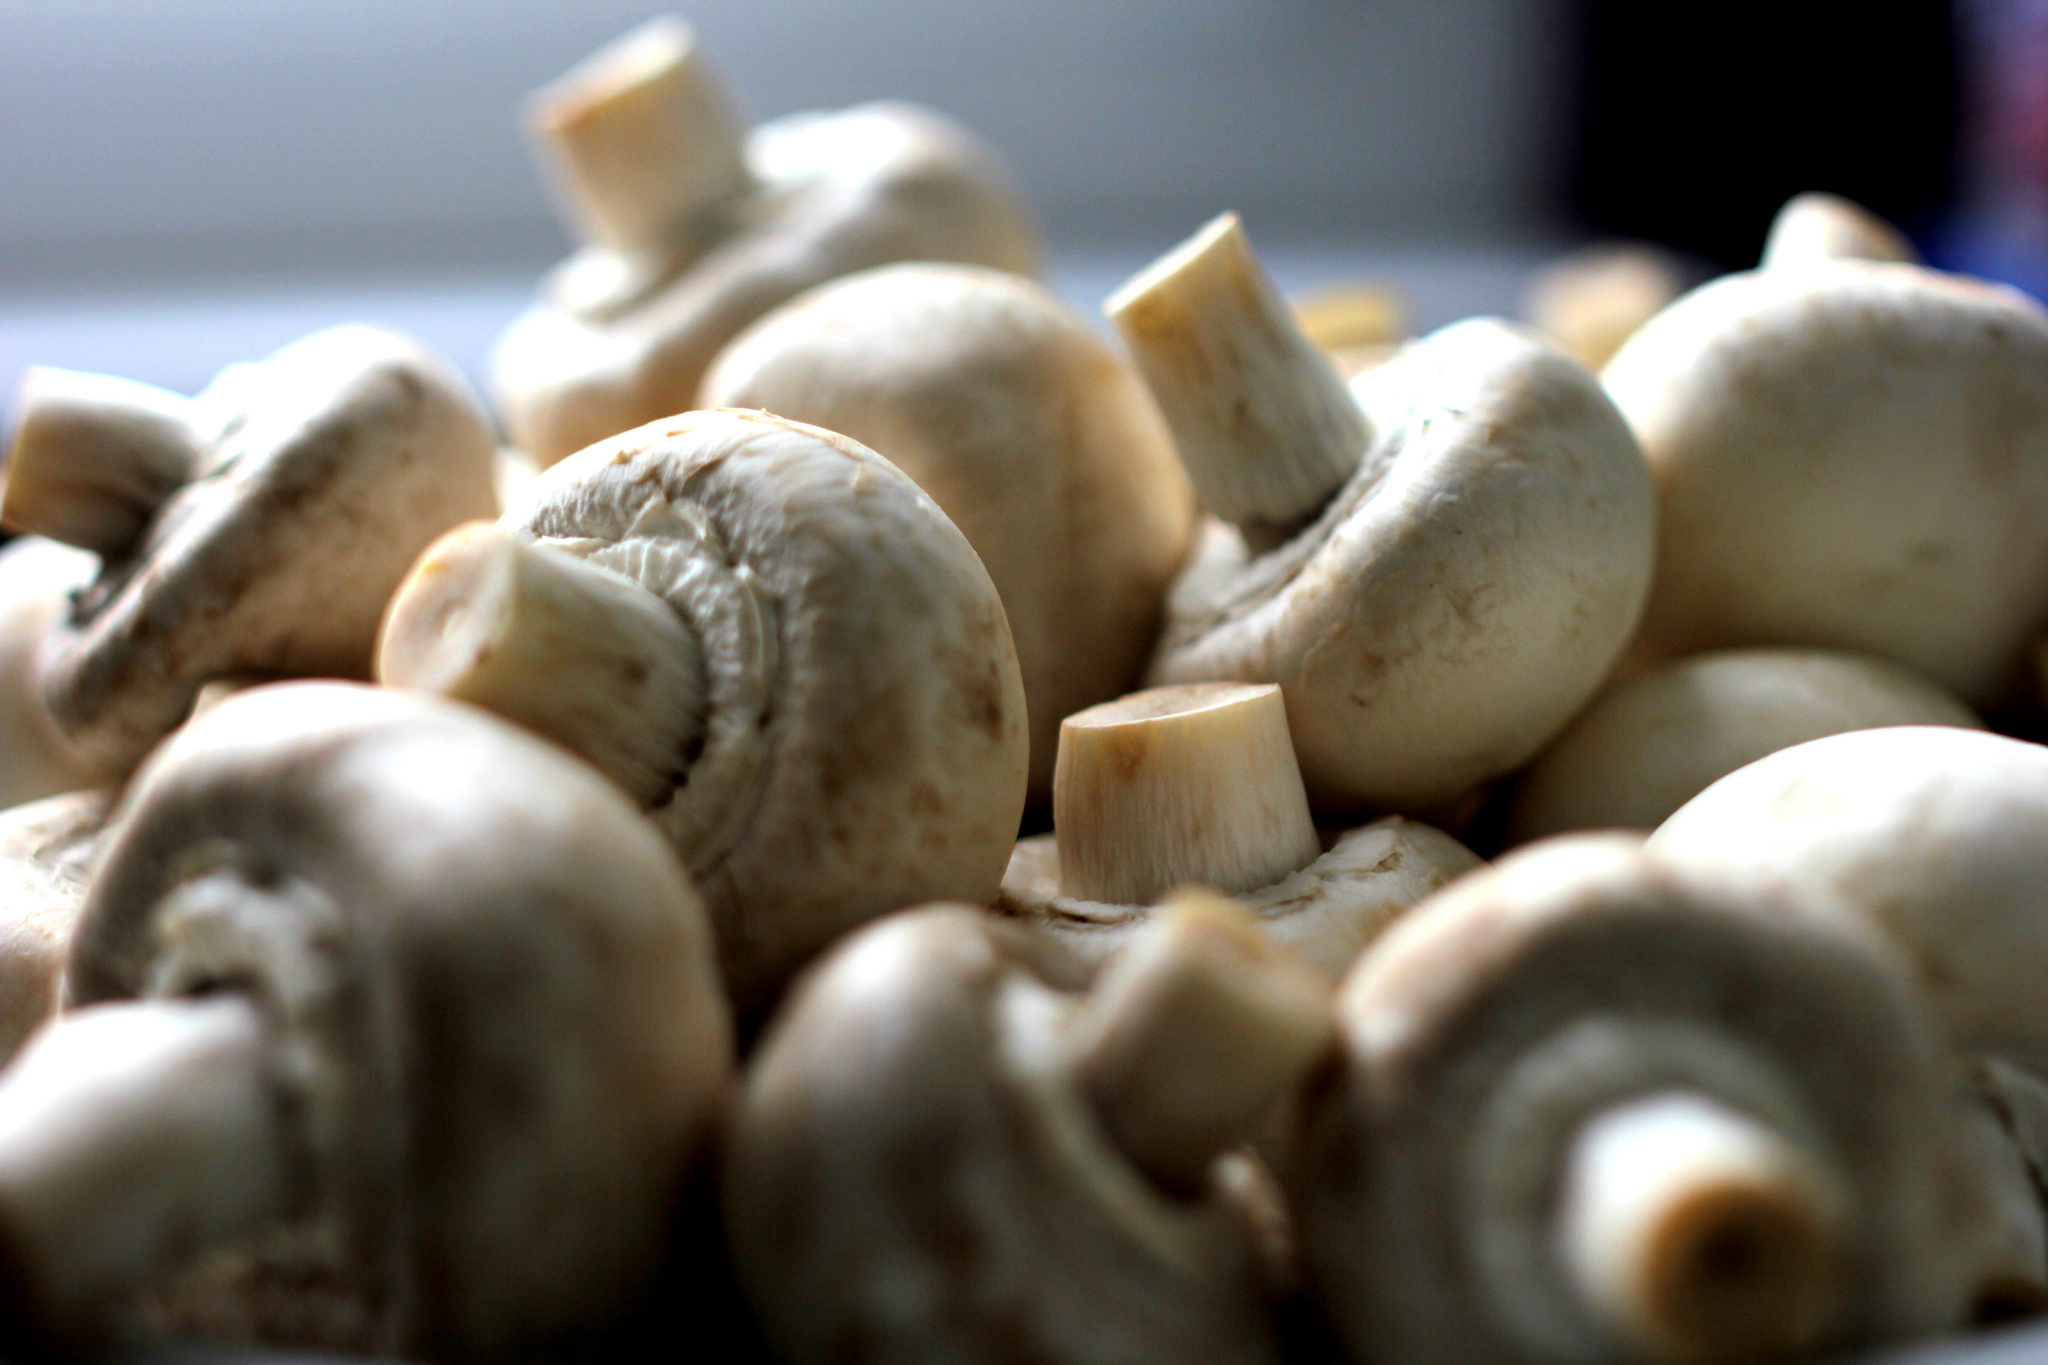 Mushrooms © Christian Schnettelker – flickr.com (used under CC BY 2.0 – Unmodified)